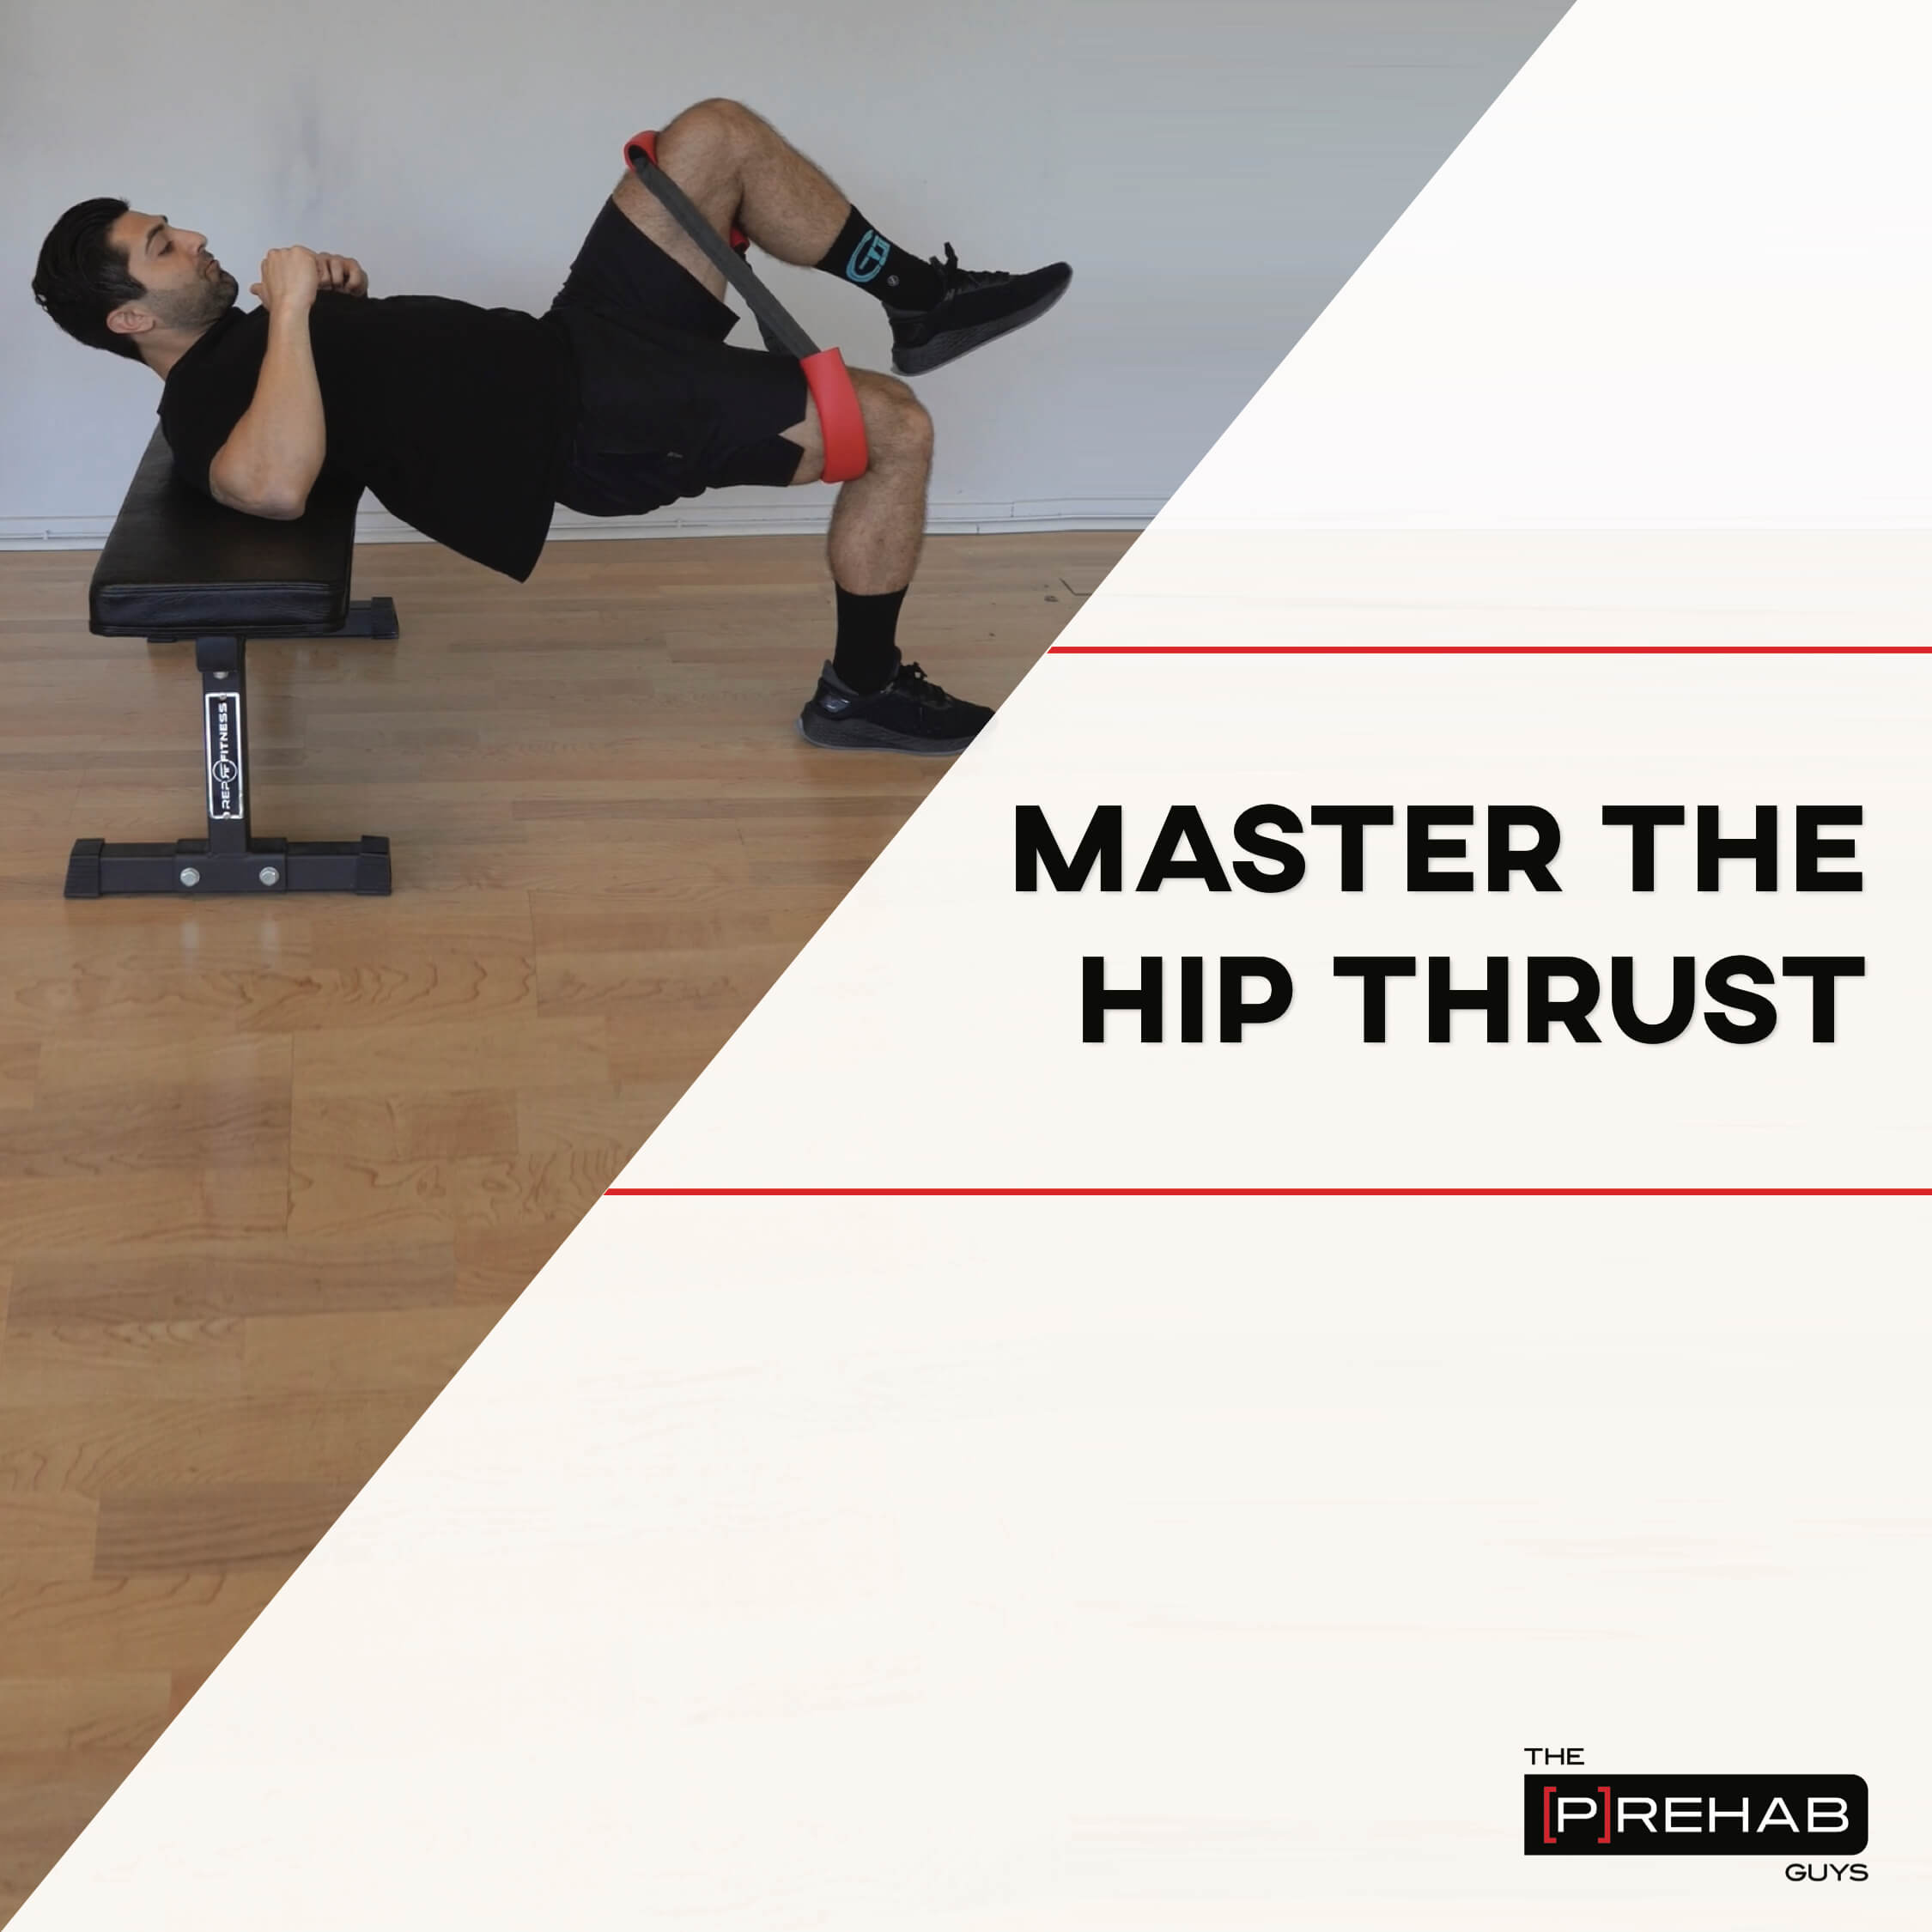 Master The Hip Thrust 𝙏𝙝𝙚 𝙋𝙧𝙚𝙝𝙖𝙗 𝙂𝙪𝙮𝙨 Online Physical Therapy